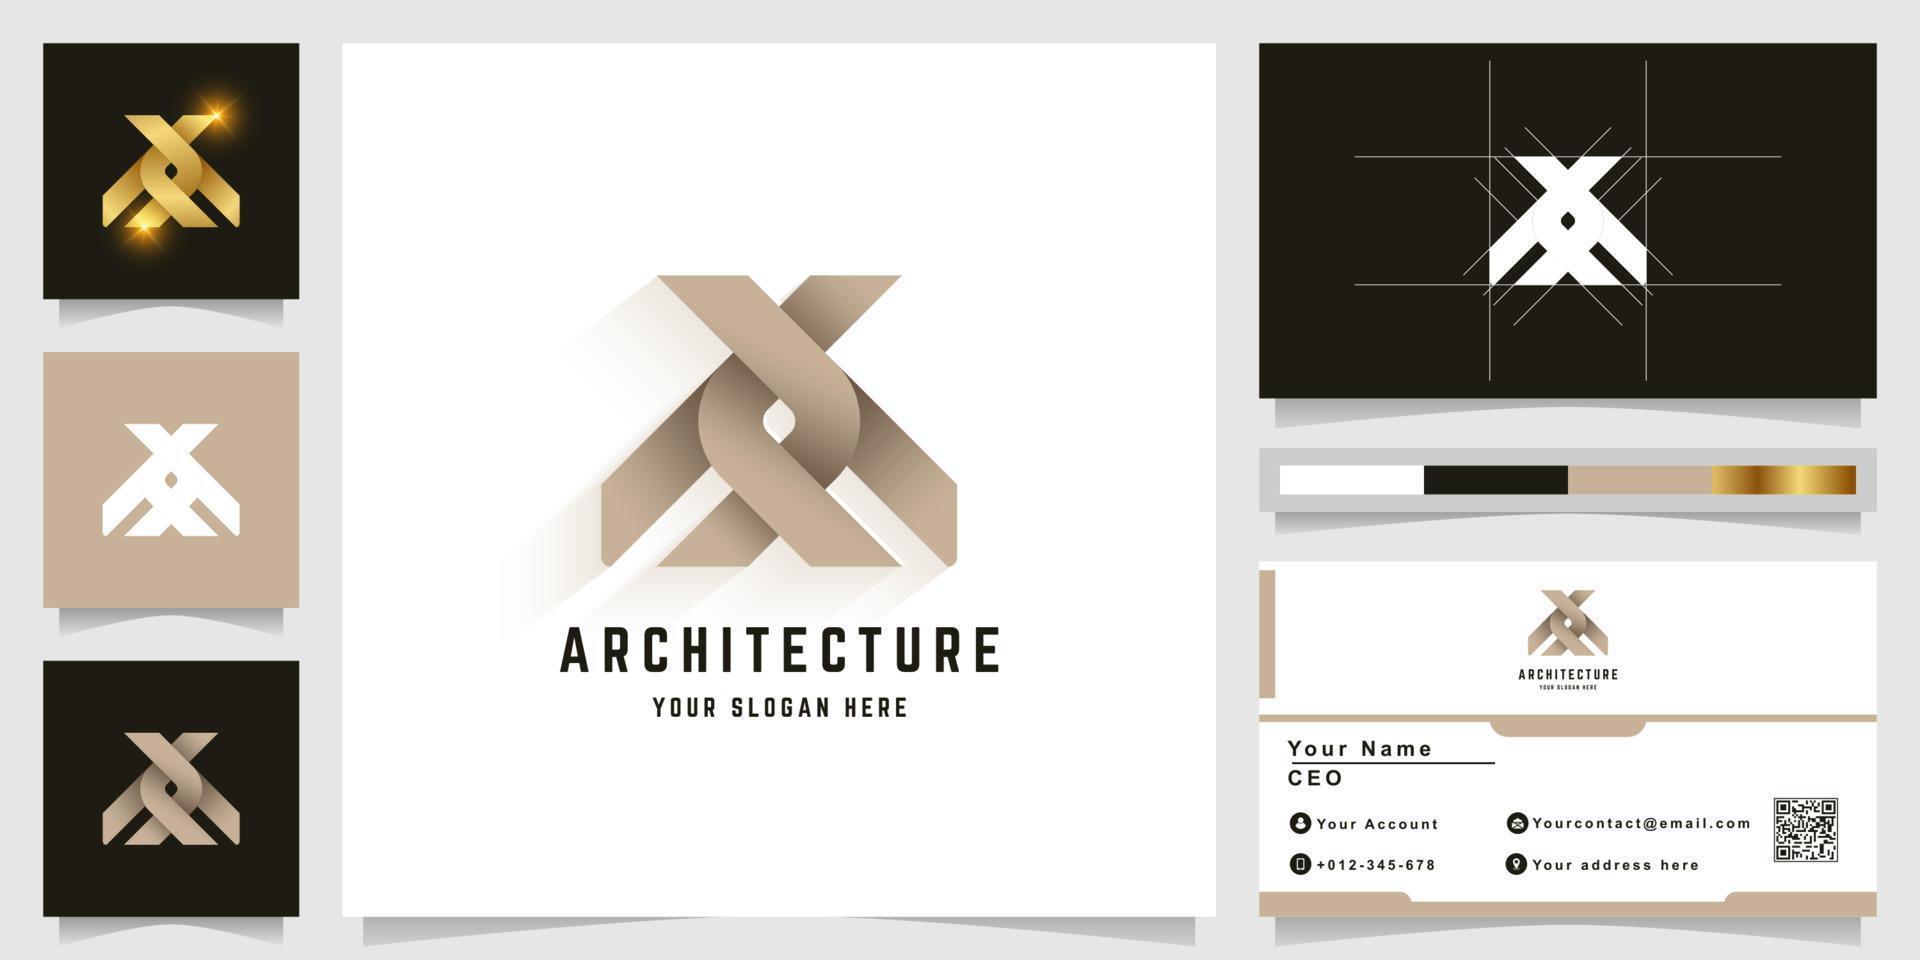 Letter X or architecture AX monogram logo with business card design vector